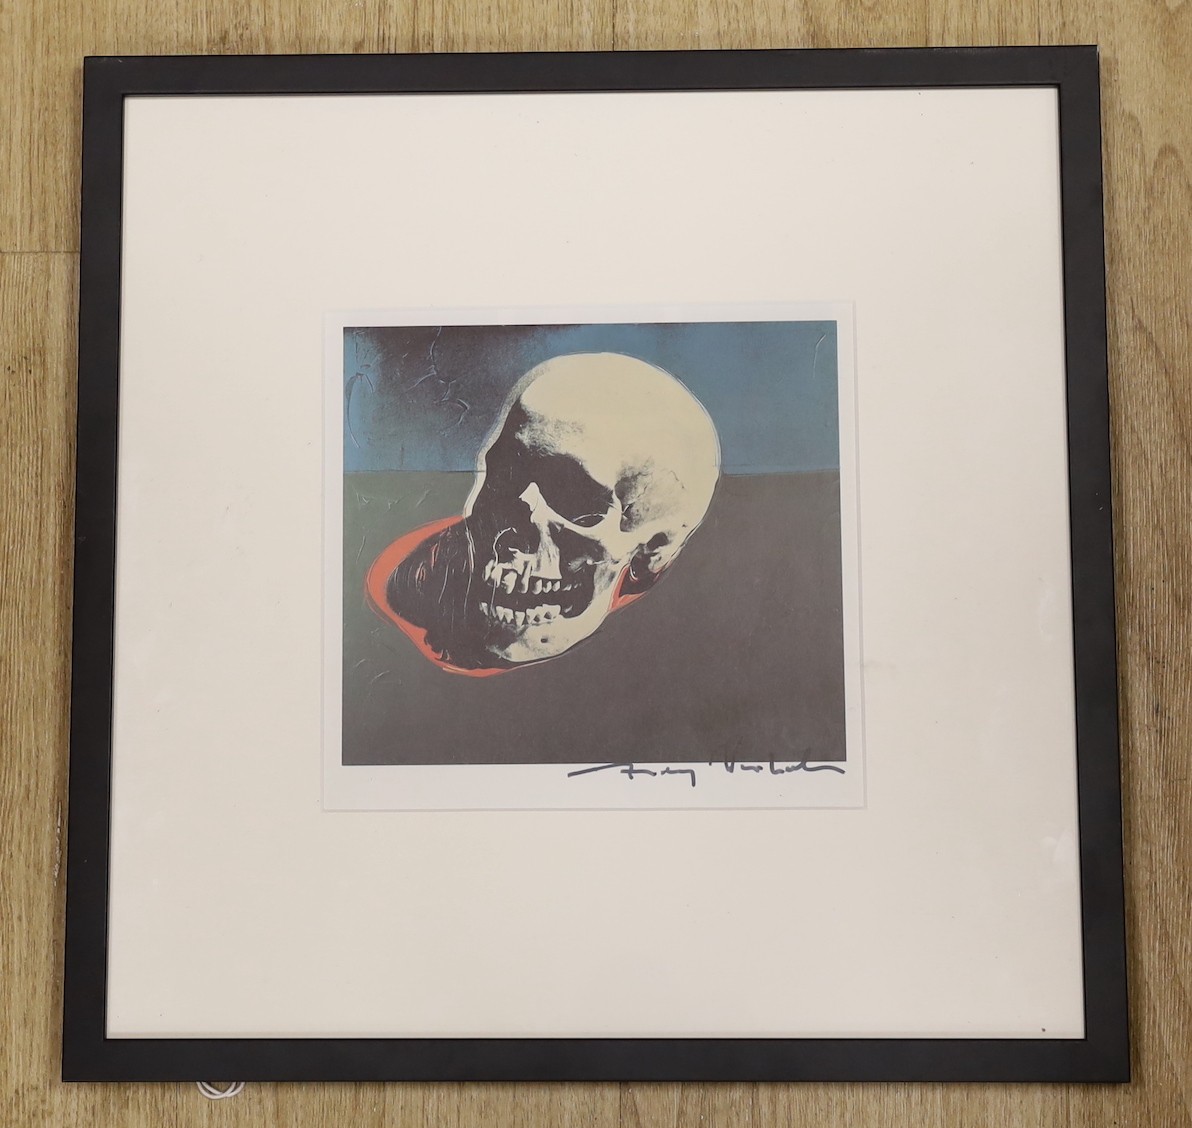 Andy Warhol (1928-1987), signed print, 'Skull' from a VIP Book, published 1986, 21 x 22cm, with COA